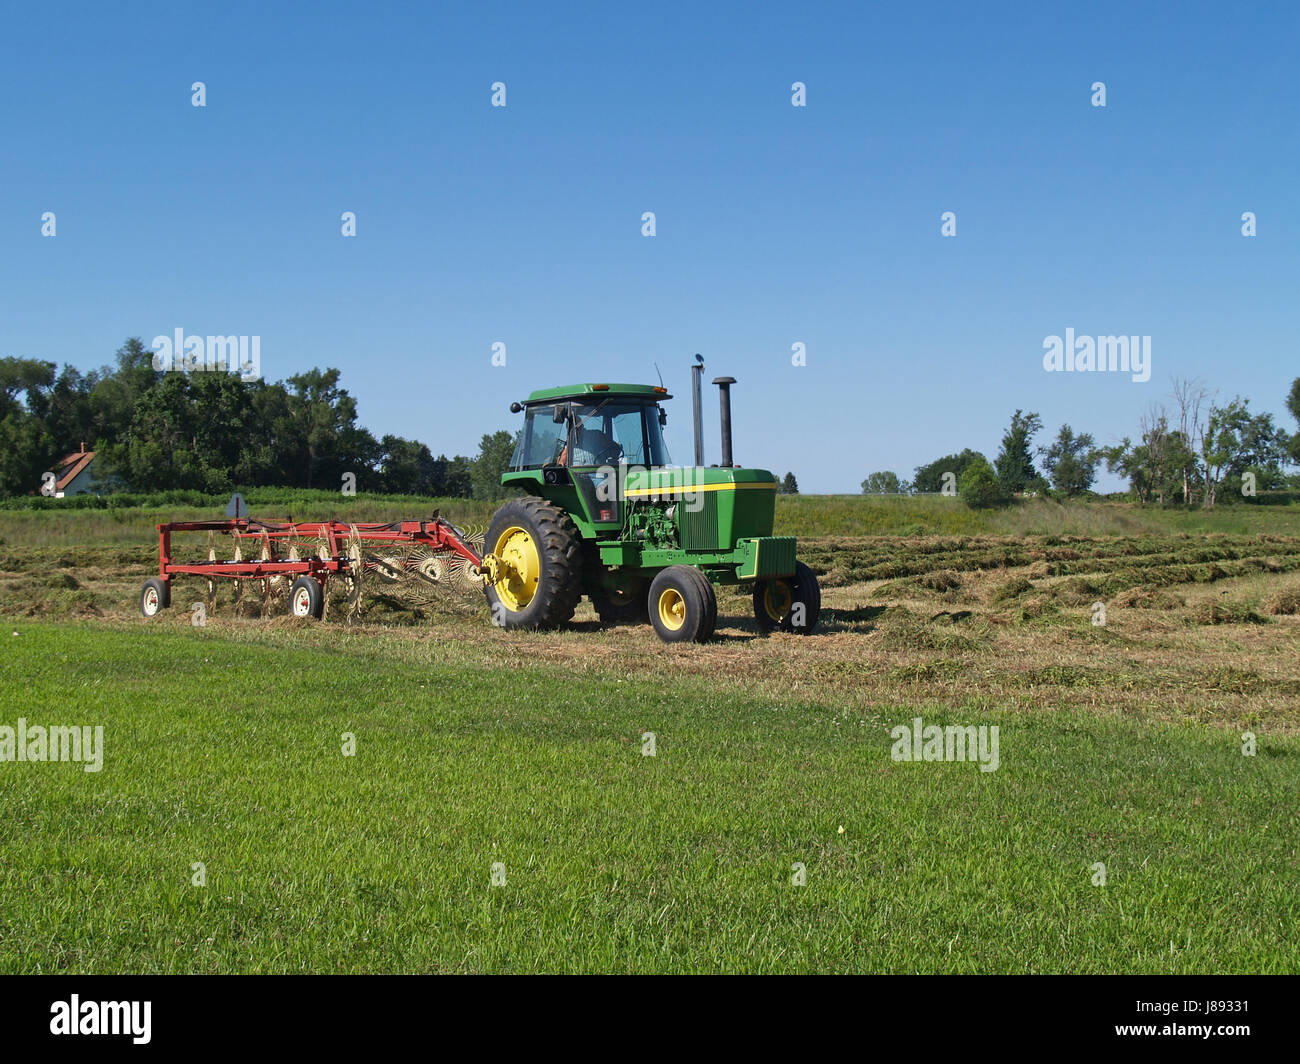 agriculture, farming, field, harvest, farm, tractor, hay, country, rake, blue, Stock Photo